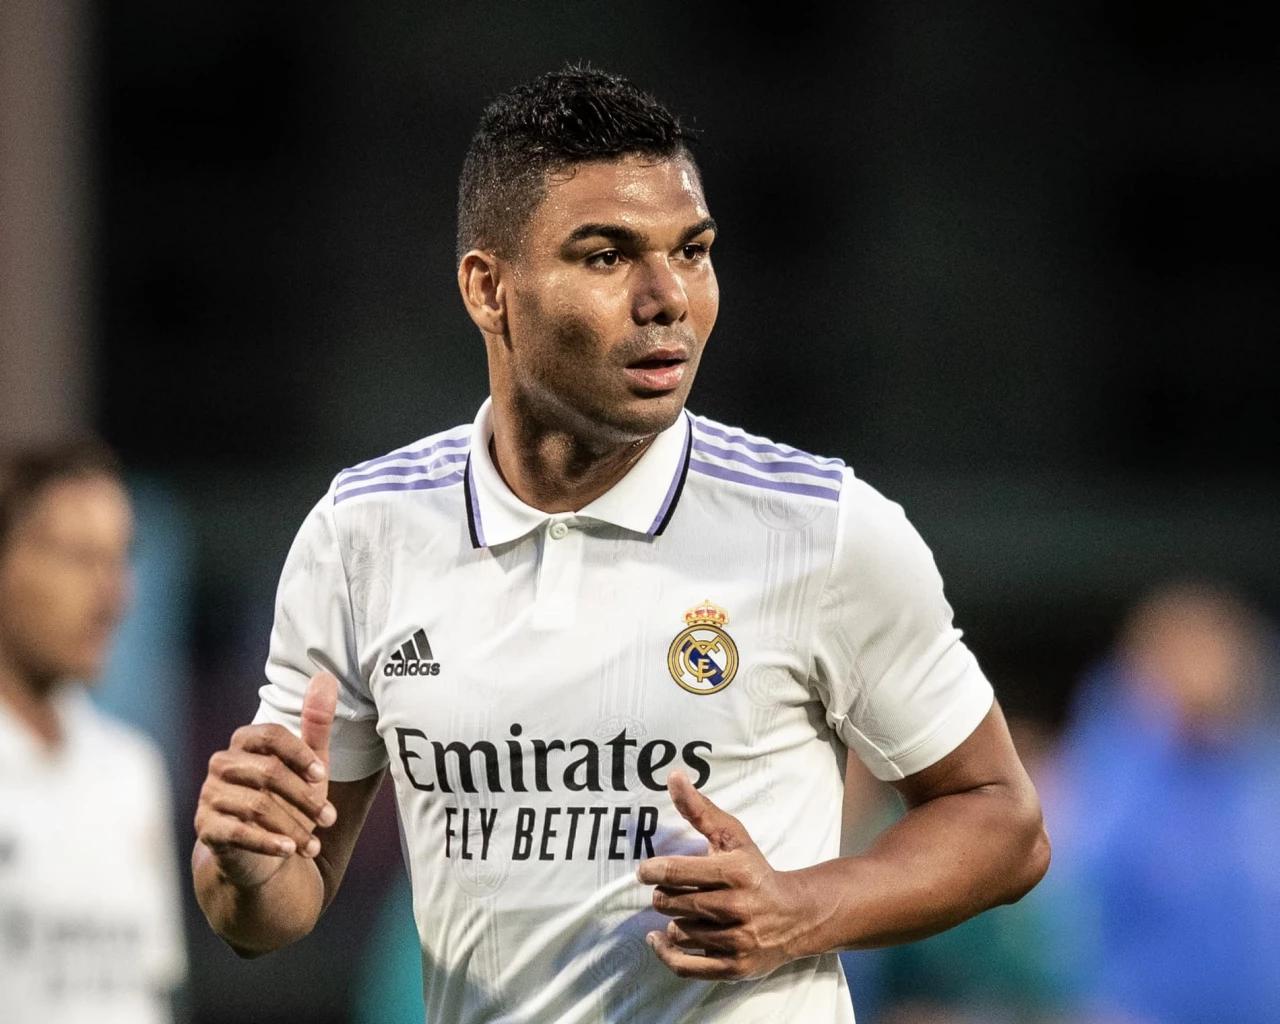 Man United closing in on Casemiro signing - reports